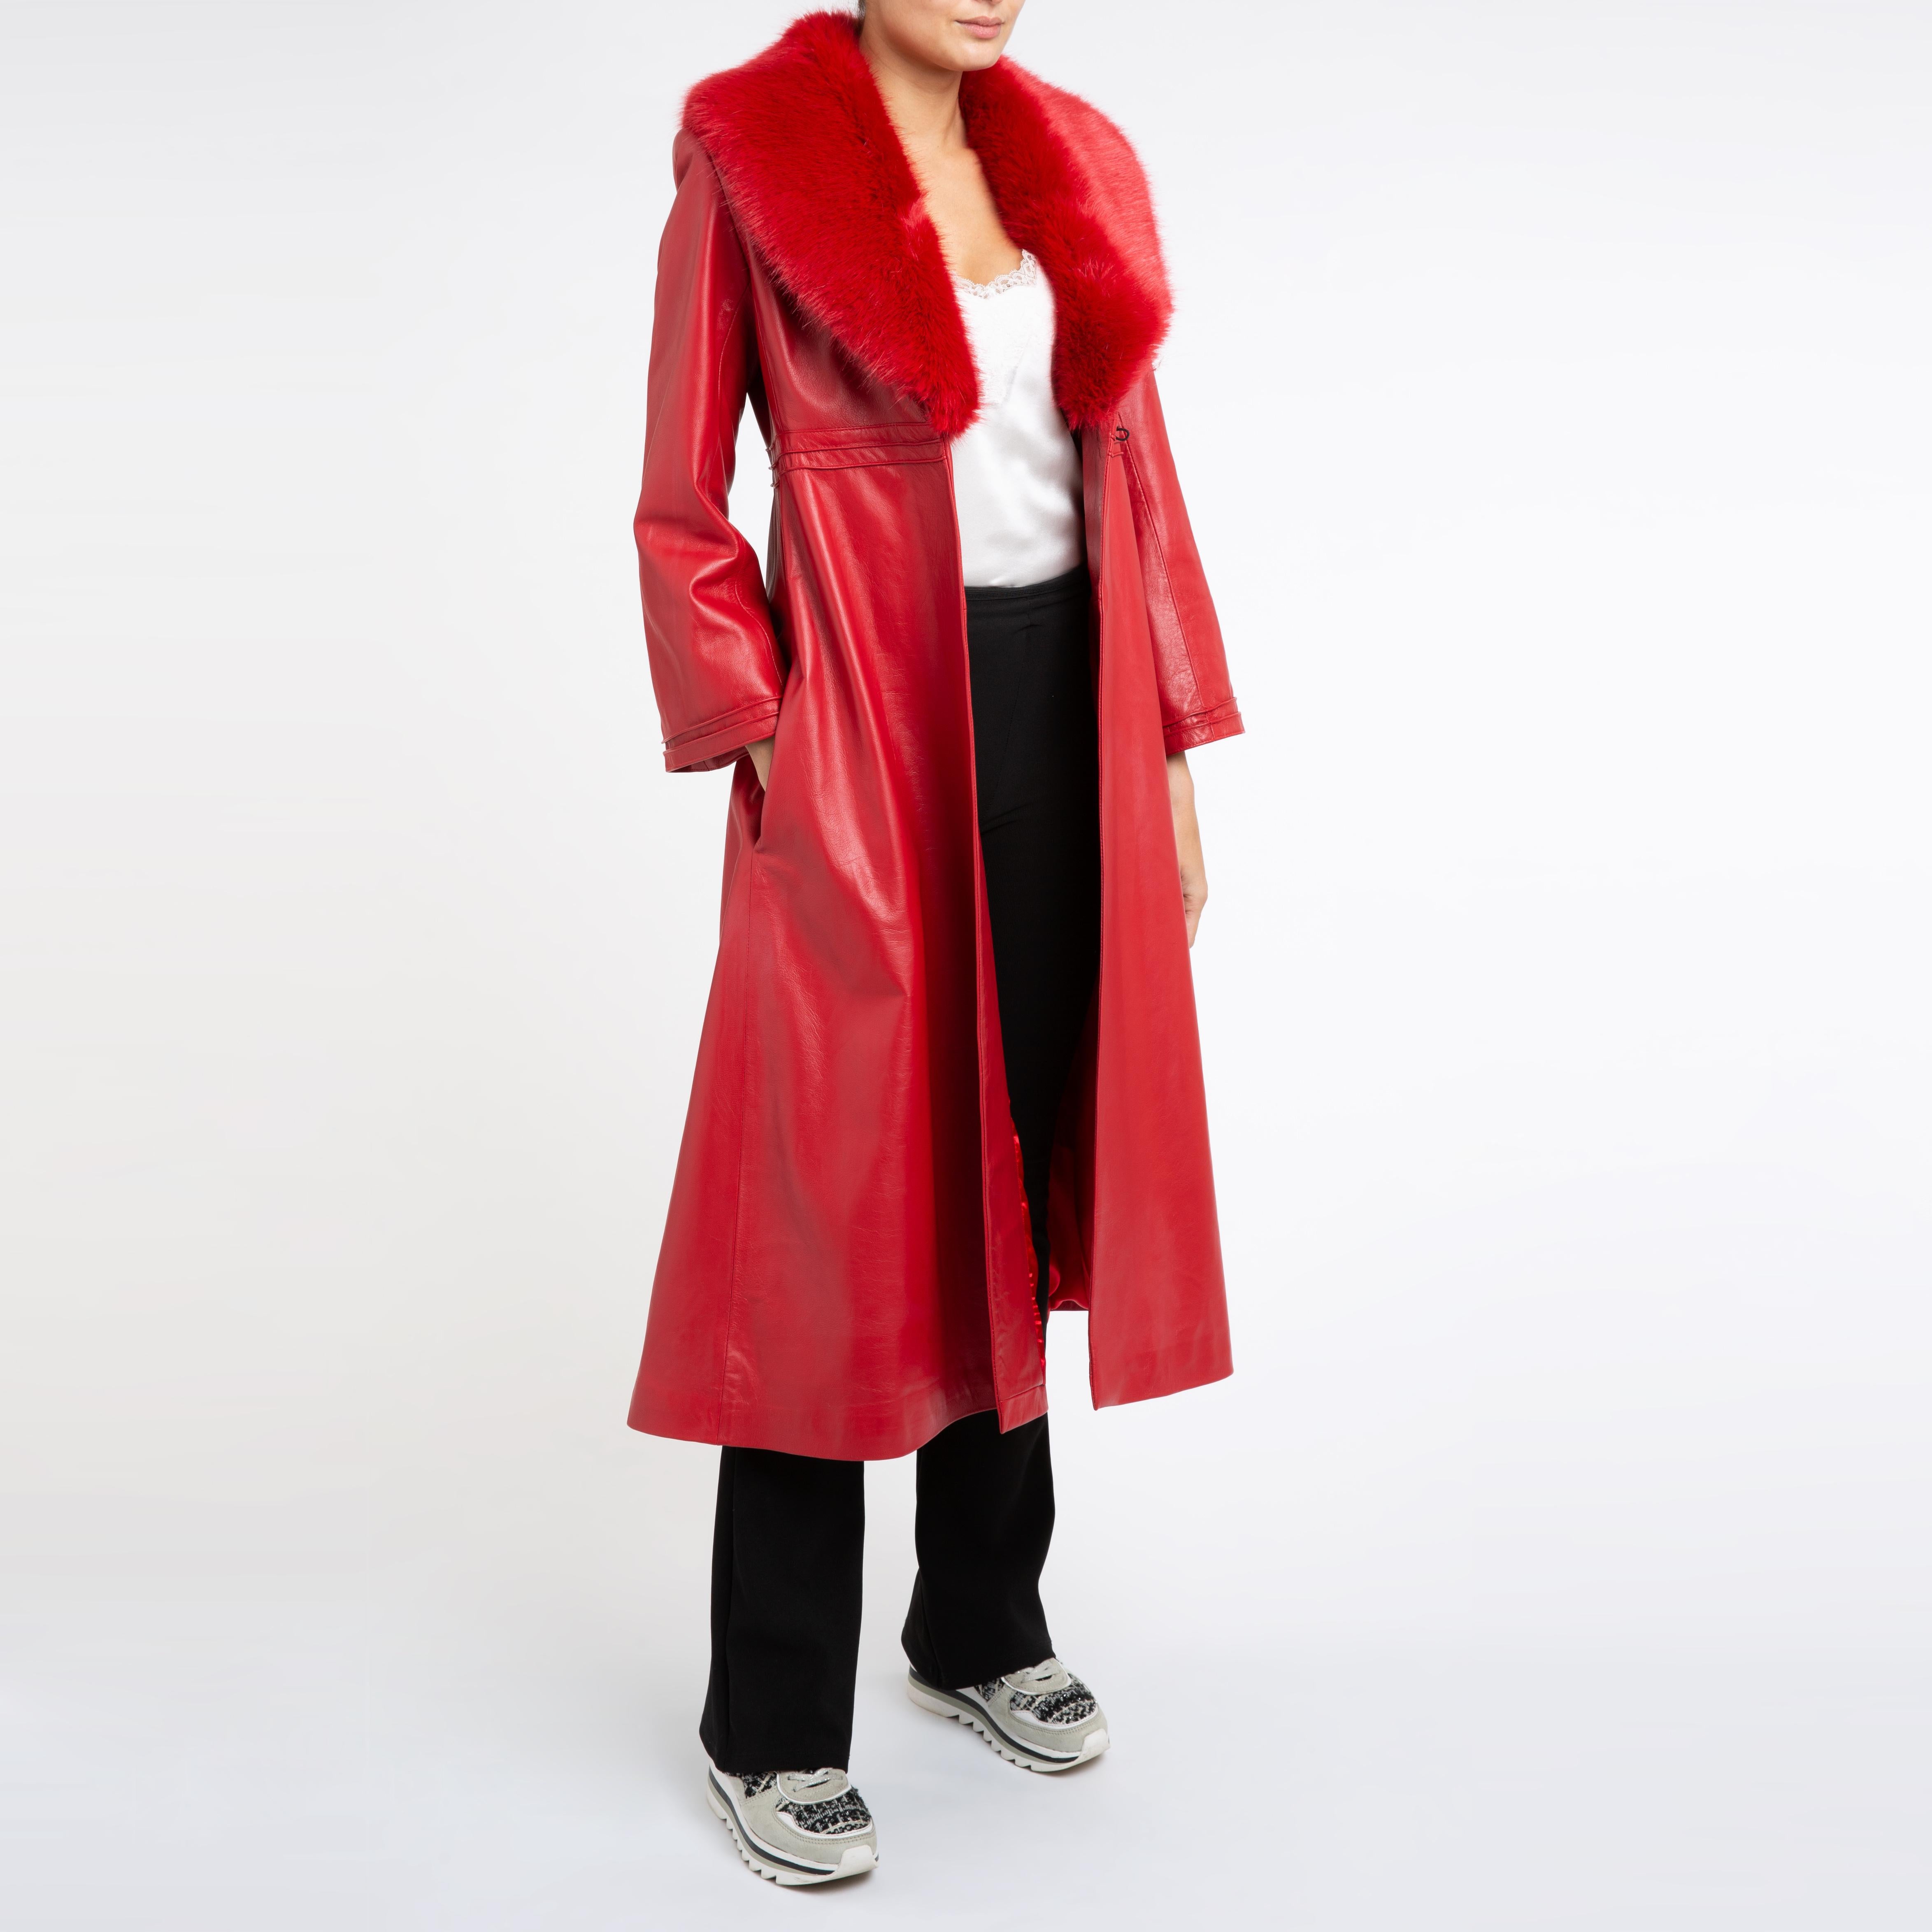 Verheyen London Edward Leather Coat with Faux Fur Collar in Red - Size uk 12

The Edward Leather Coat created by Verheyen London is a romantic design inspired by the 1970s and Edwardian Era of Fashion.  A timeless design to be be worn for a lifetime